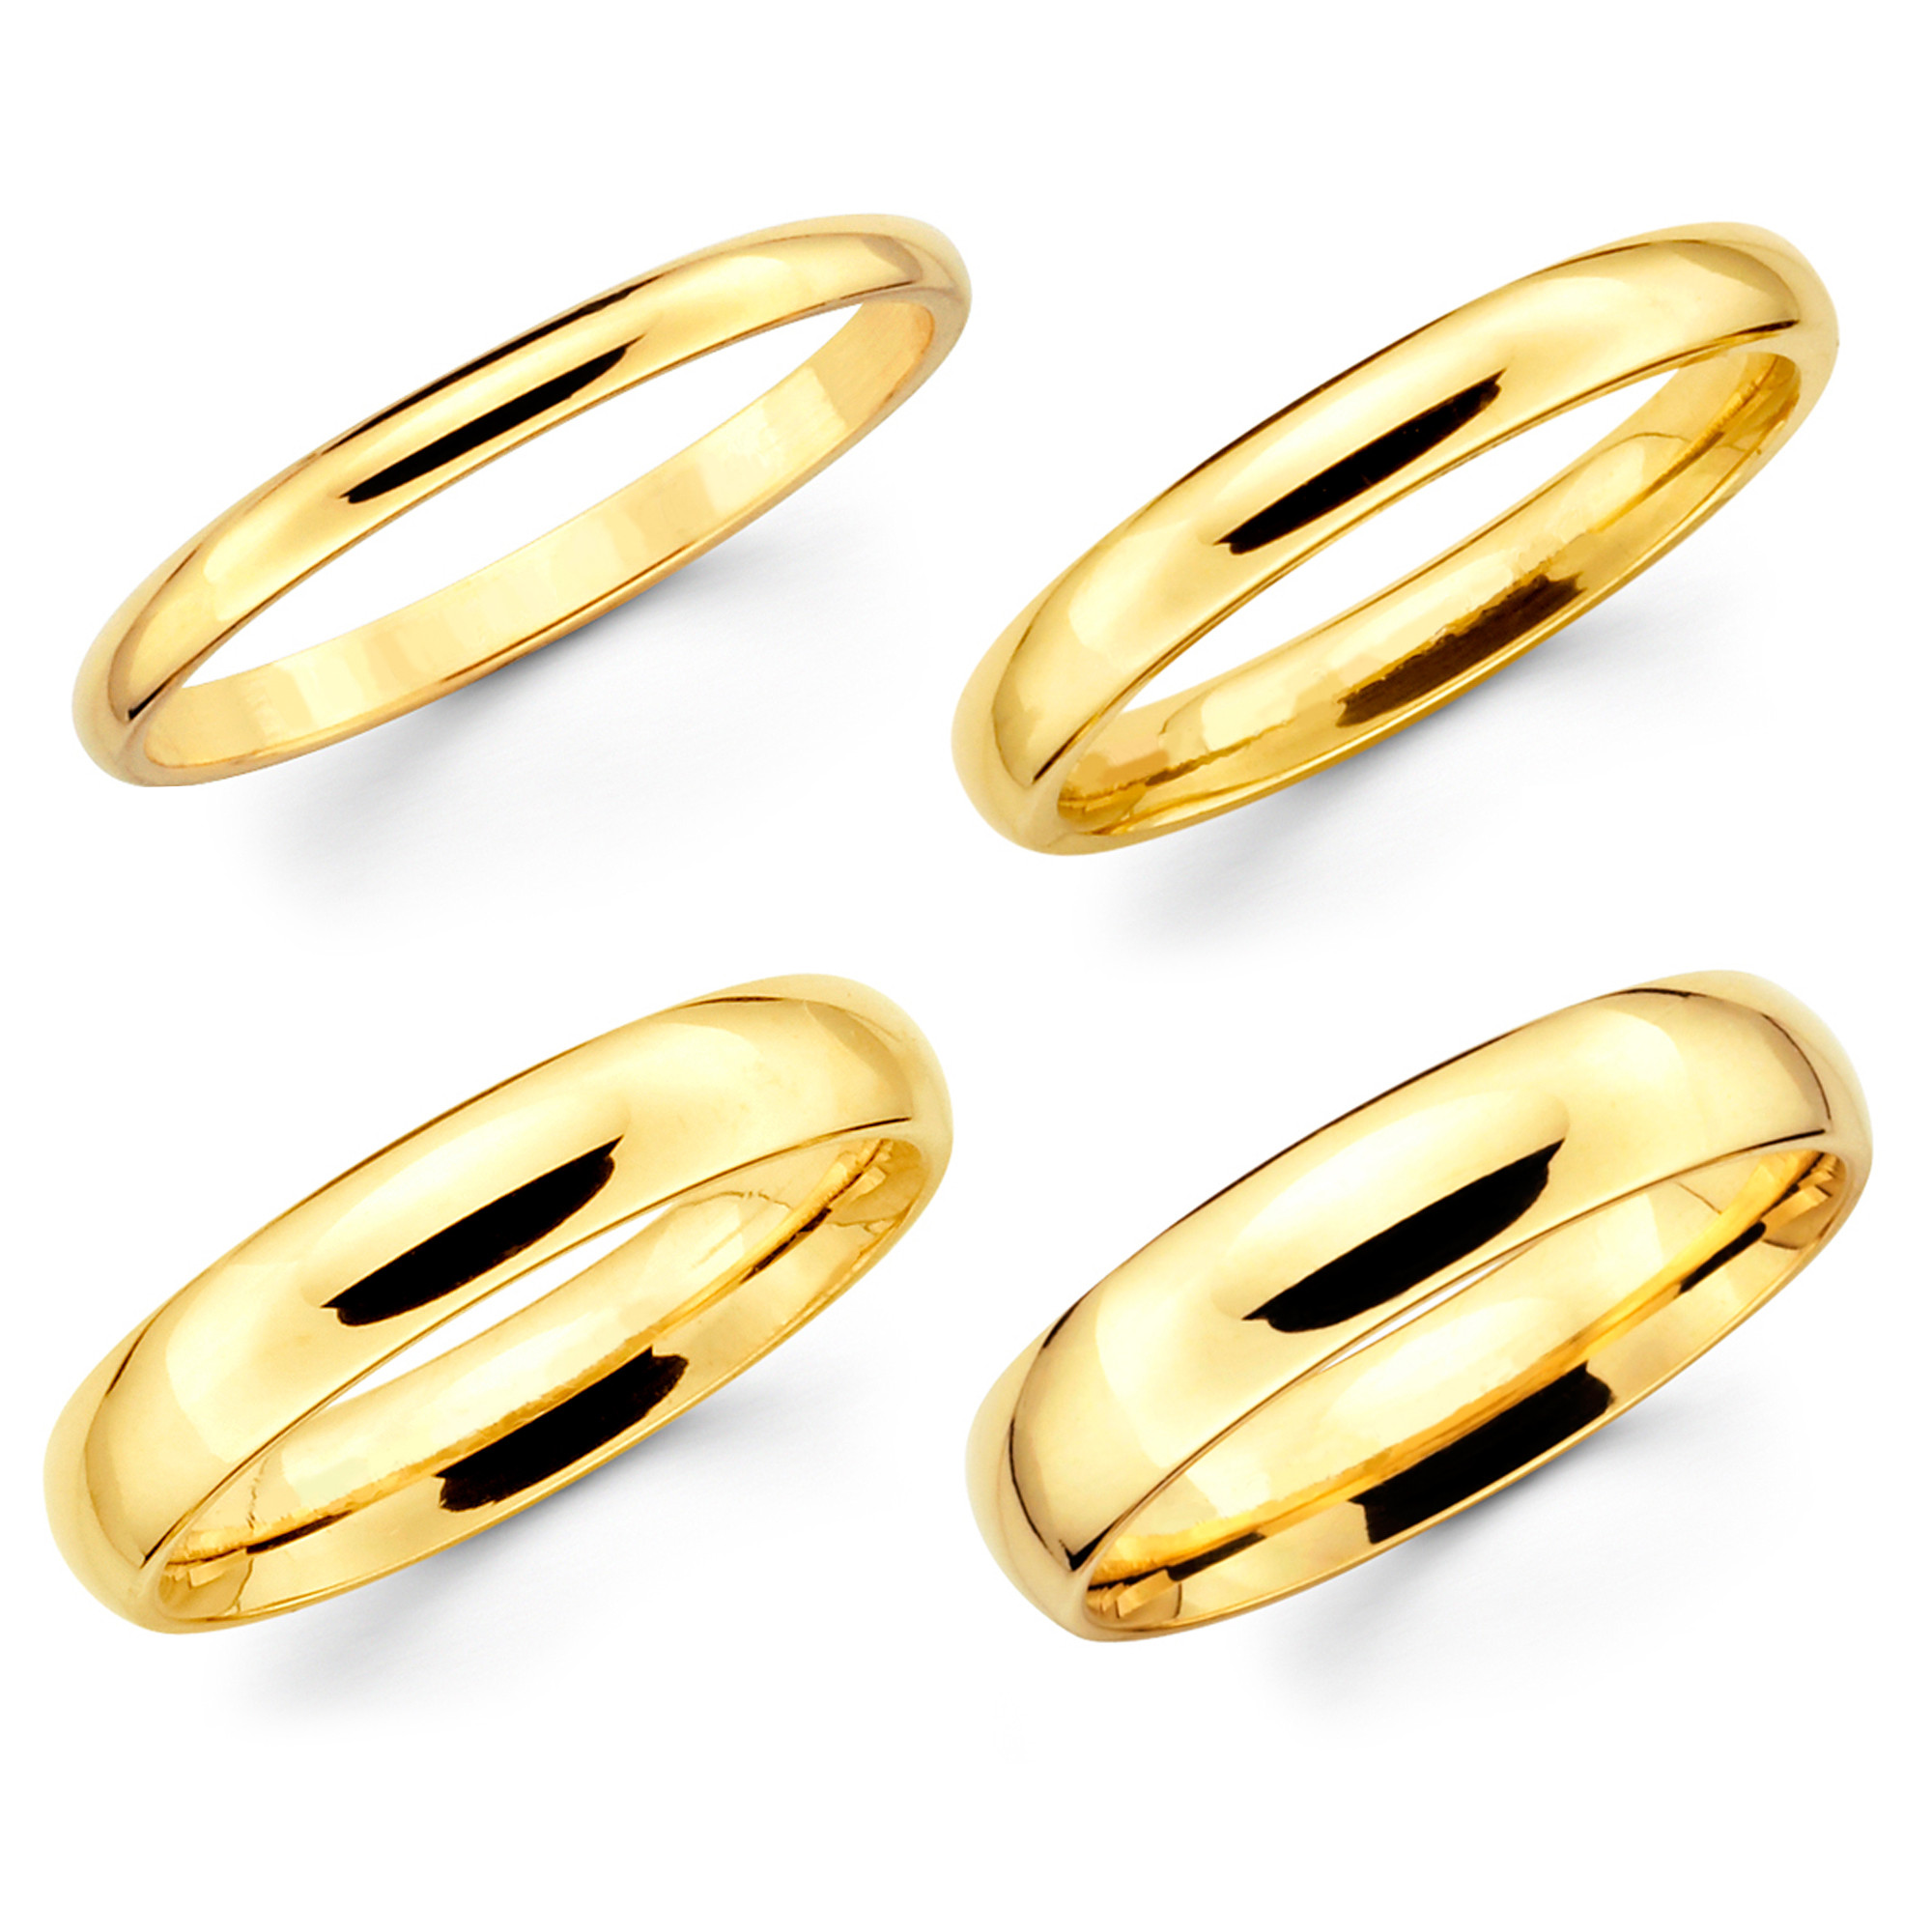 Solid Gold Wedding Bands
 Buy Cheap Solid 10K Yellow Gold 2mm 3mm 4mm 5mm fort